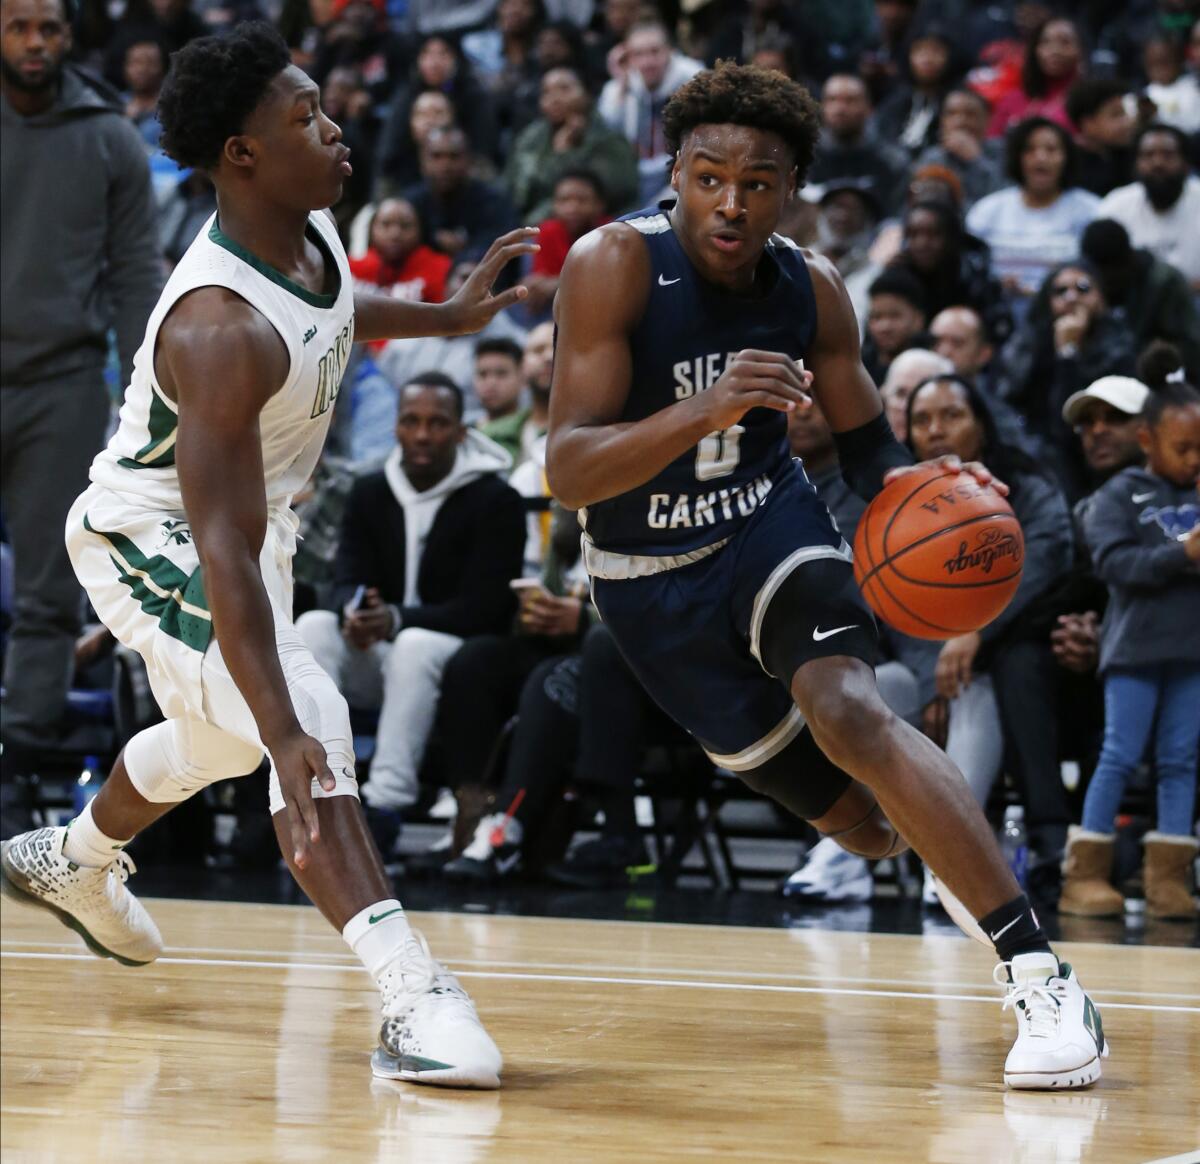 Sierra Canyon's Bronny James (0) drives against St. Vincent-St. Mary's Darrian Lewis during a game on Dec. 14, 2019, in Columbus, Ohio. James won't be under his father's watchful eye on Friday when playing against Mater Dei.